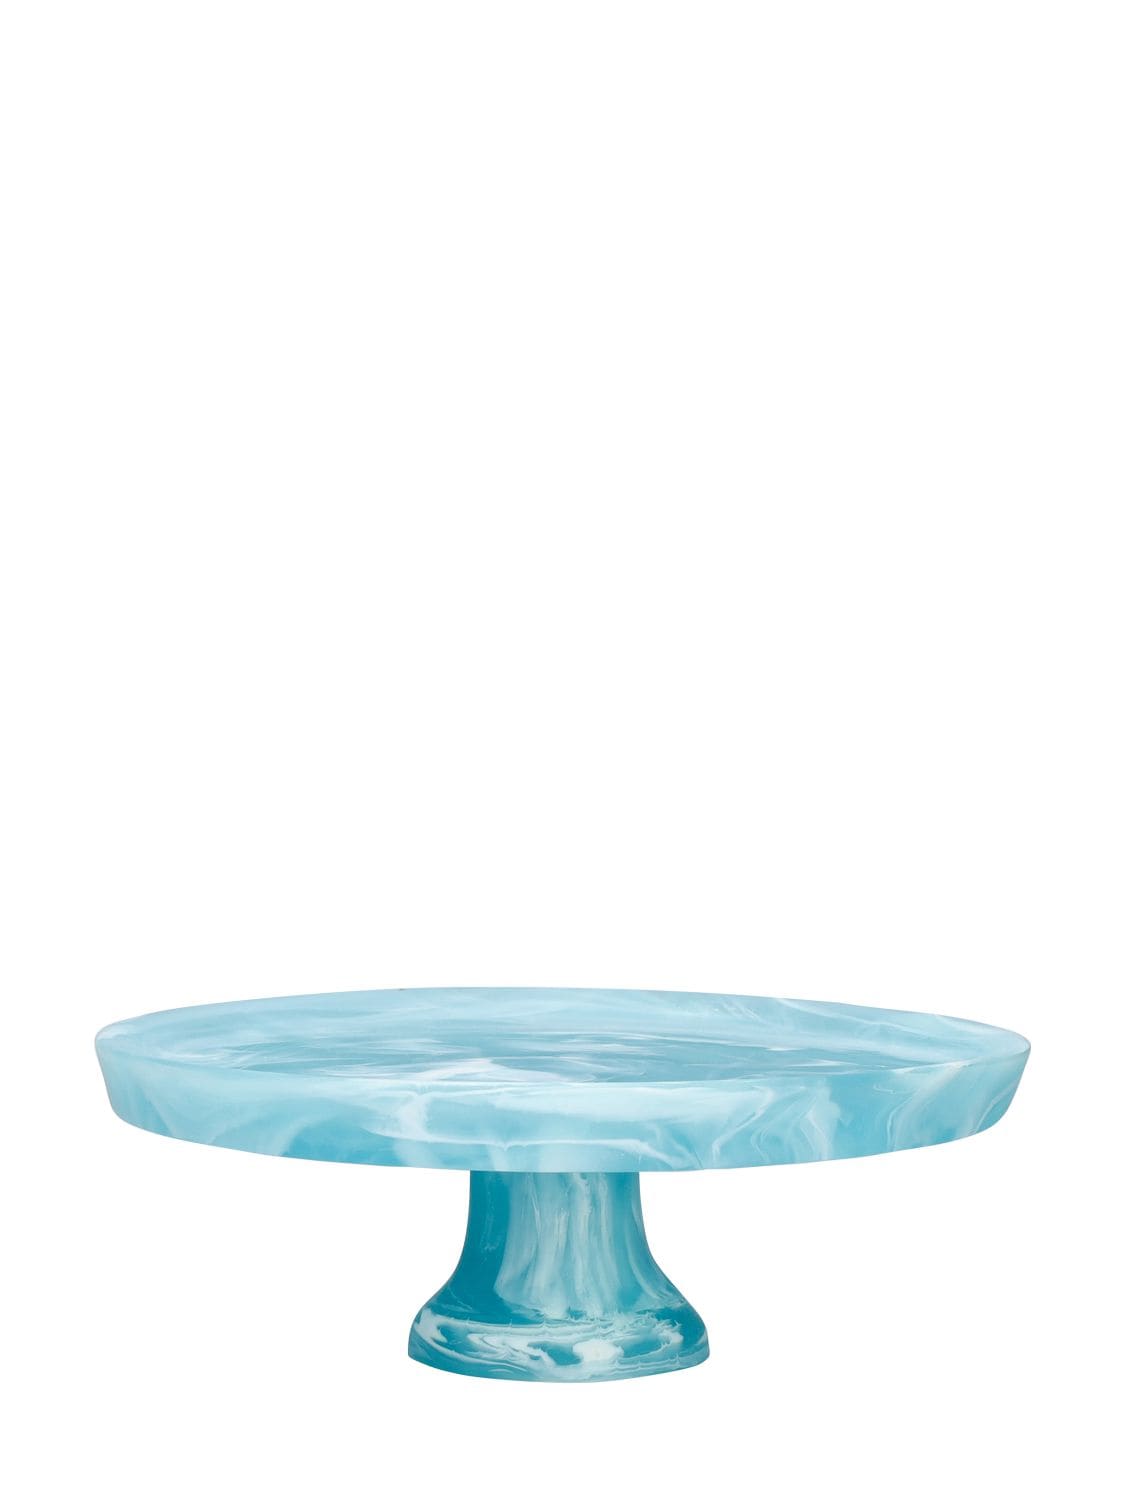 Nashi Home Medium Footed Cake Stand In Blue